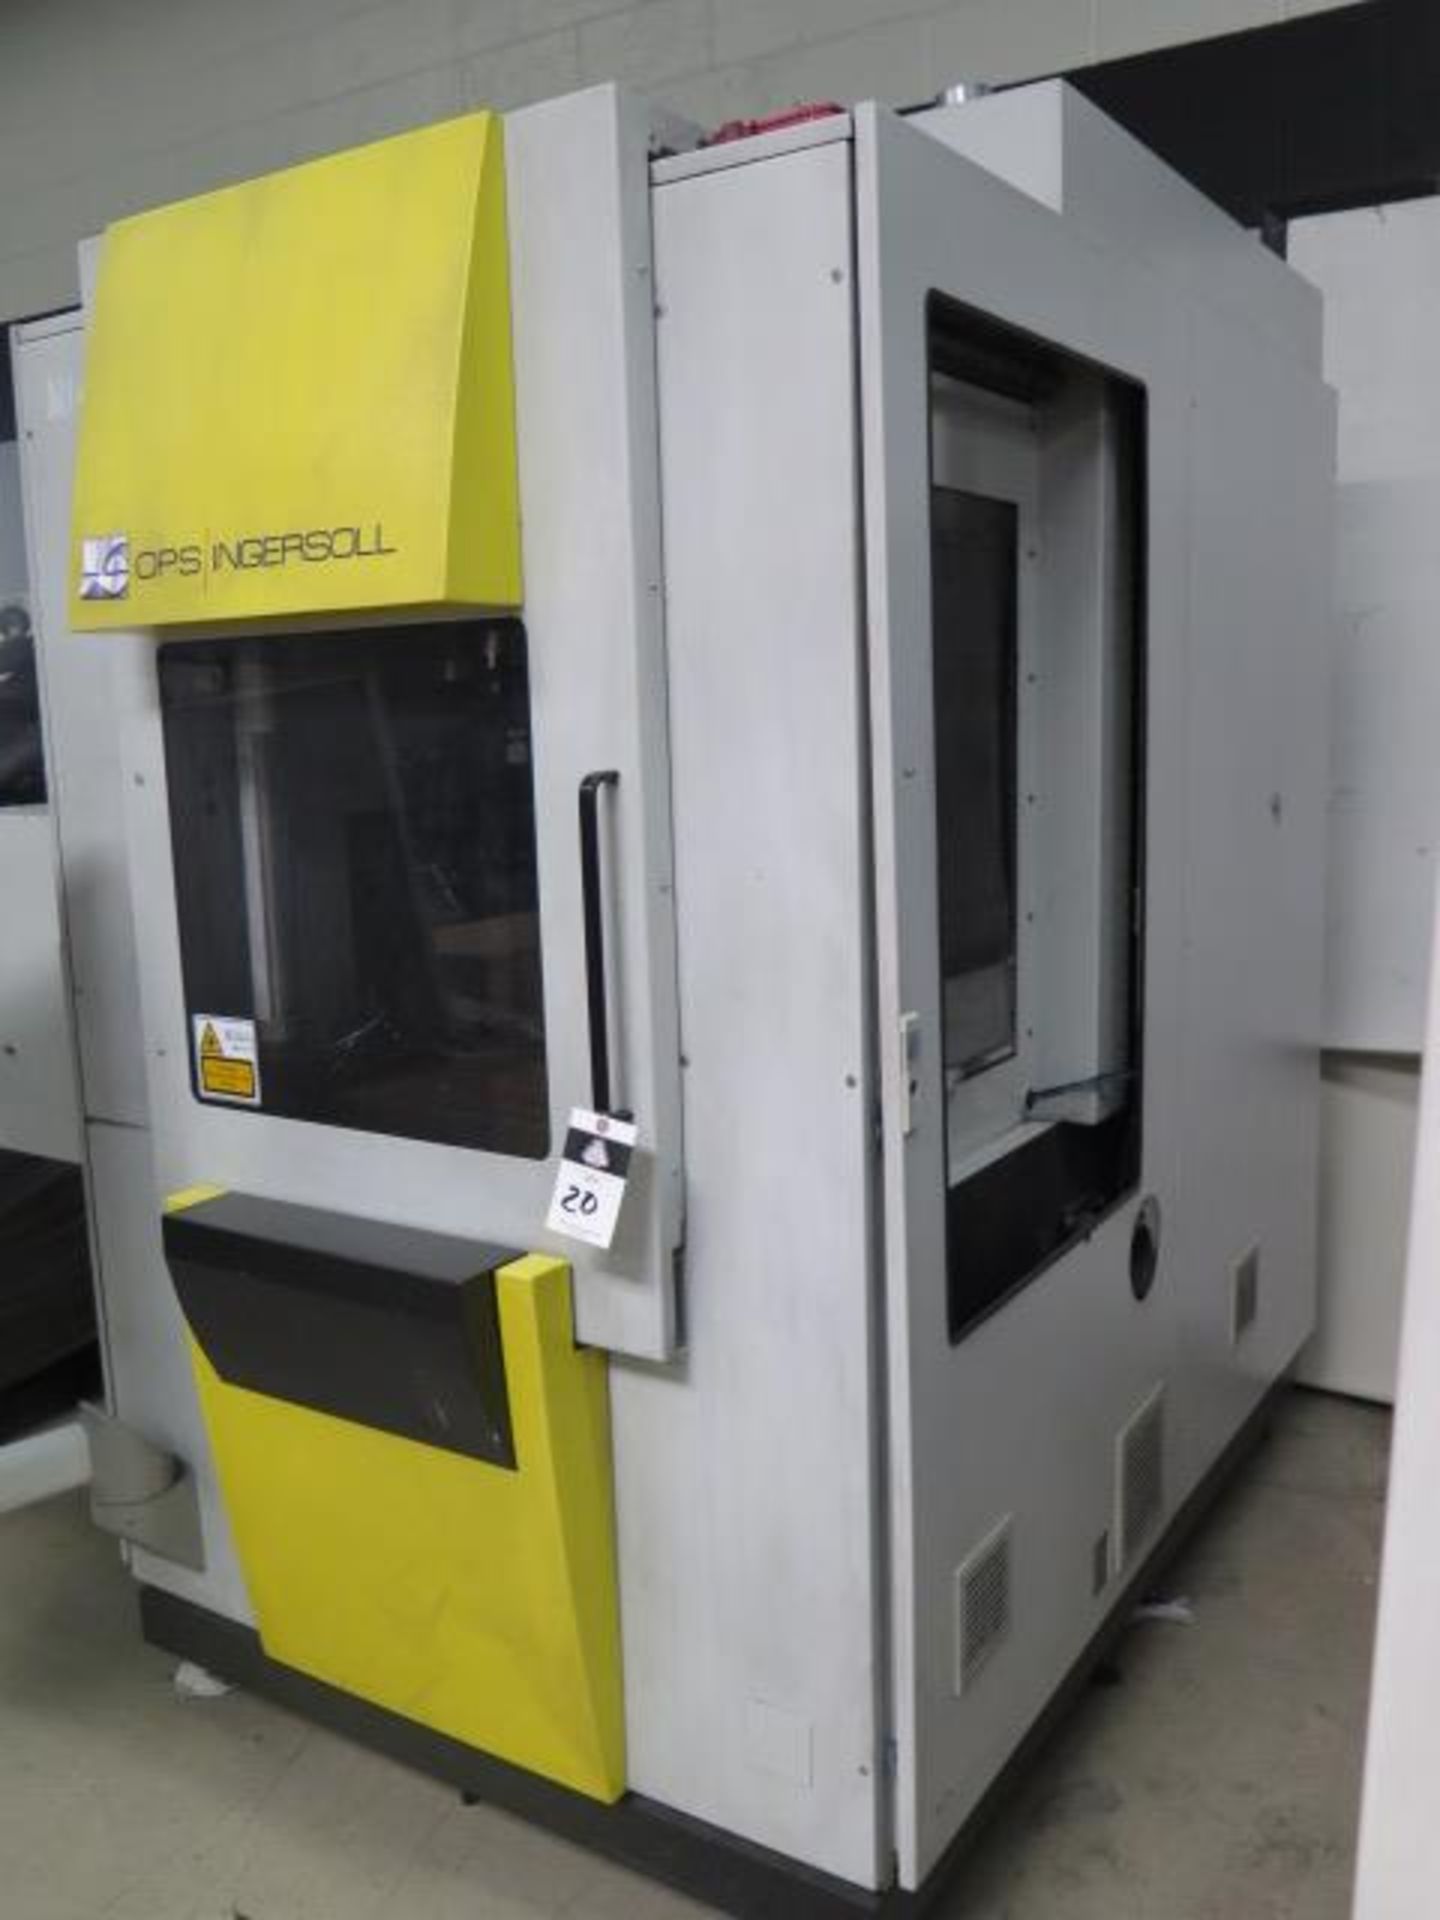 2004 Ops / Ingersoll OPS600 CNC Graphite Machining Center s/n 660098 w 40,000 RPM, SOLD AS IS - Image 2 of 10